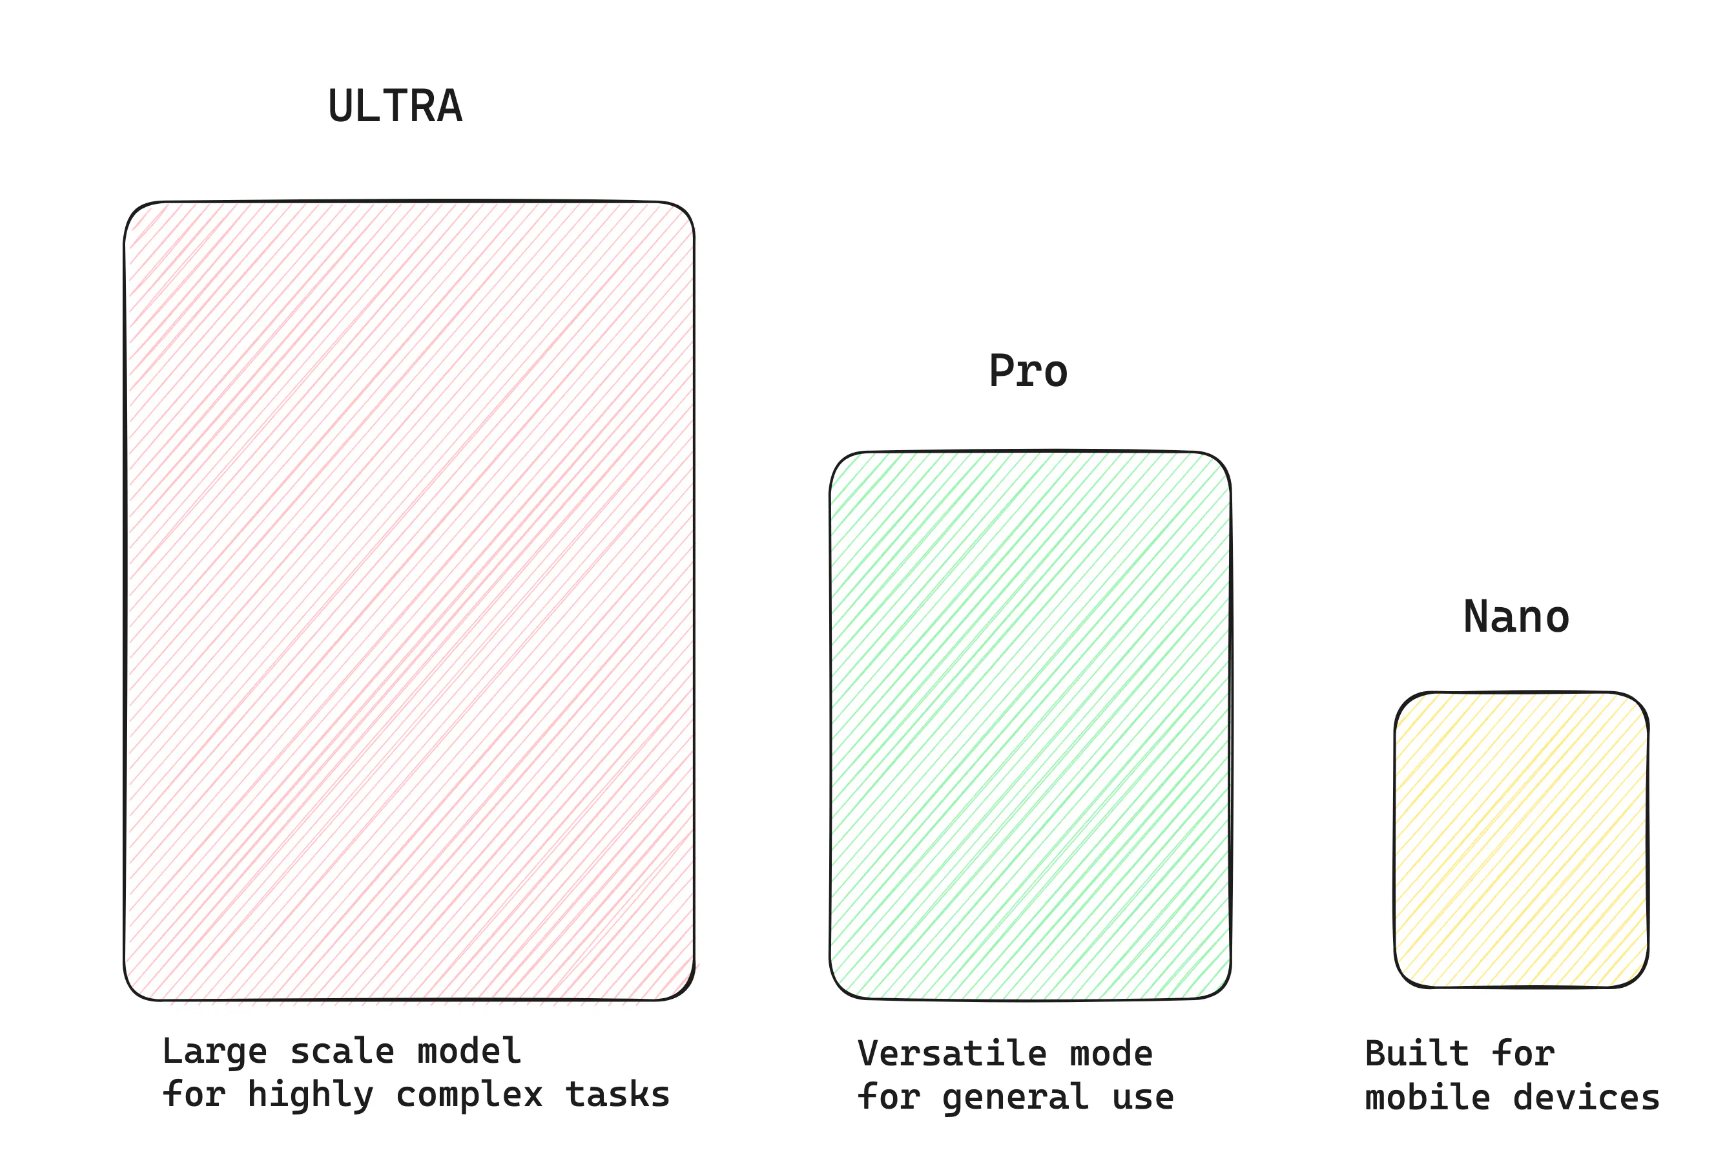 A drawing showing the difference between the different ultra, pro, and nano